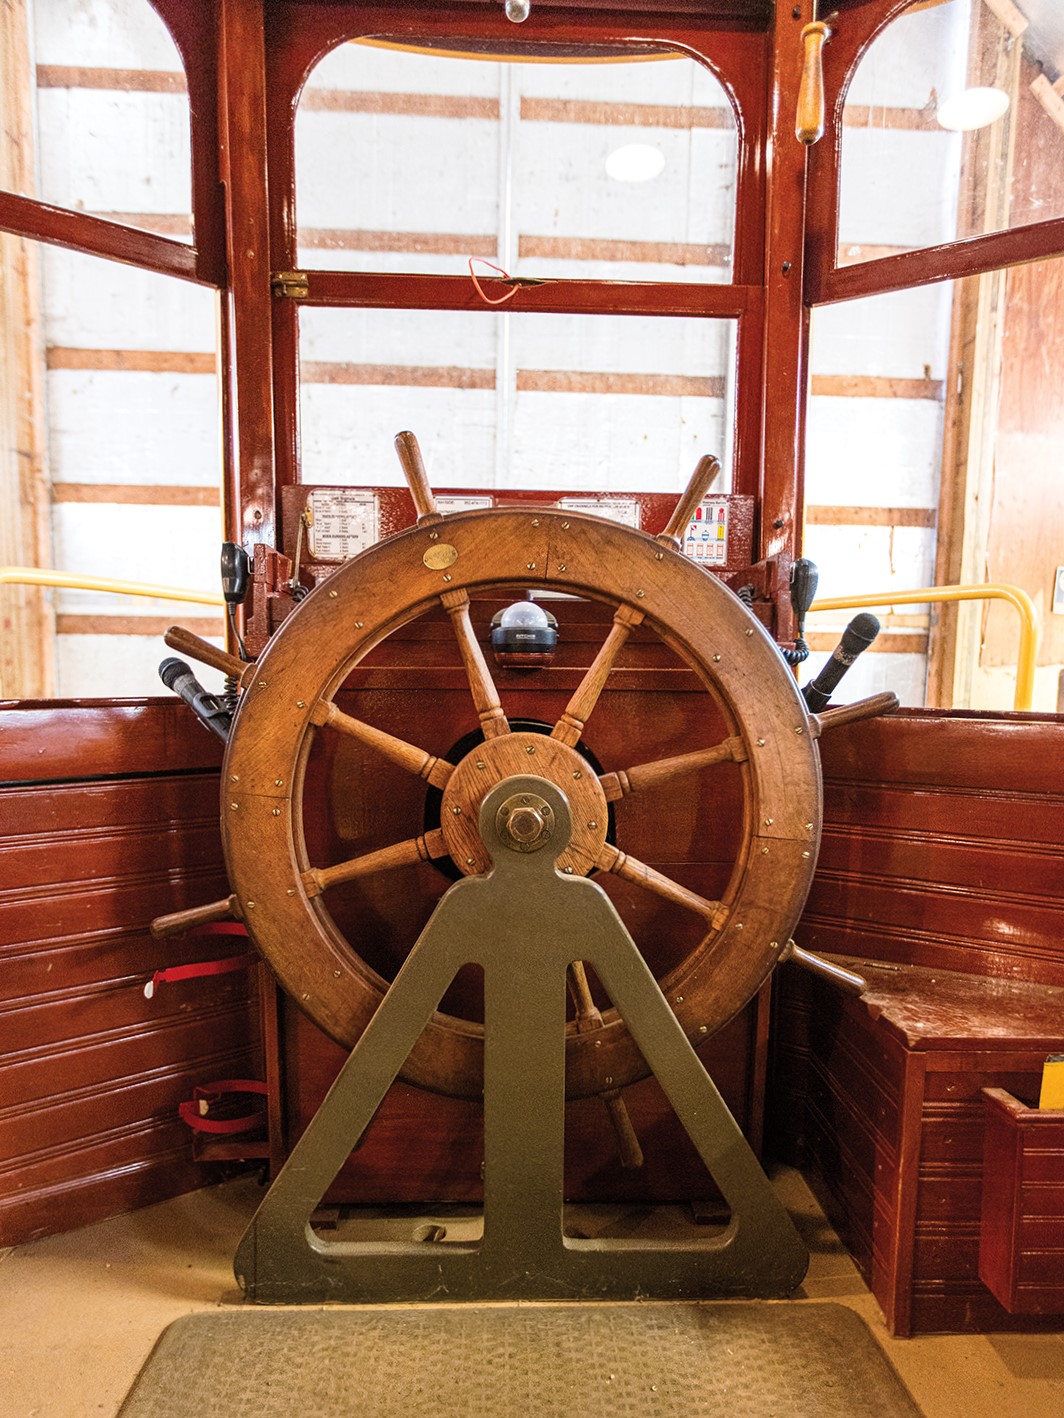 A steamboat Minnehaha wheel, constructed in 1906, was donated to the Lake Minnetonka Historical Society by Eric Sayer Peterson in 1990 in an effort to restore the Minnehaha.